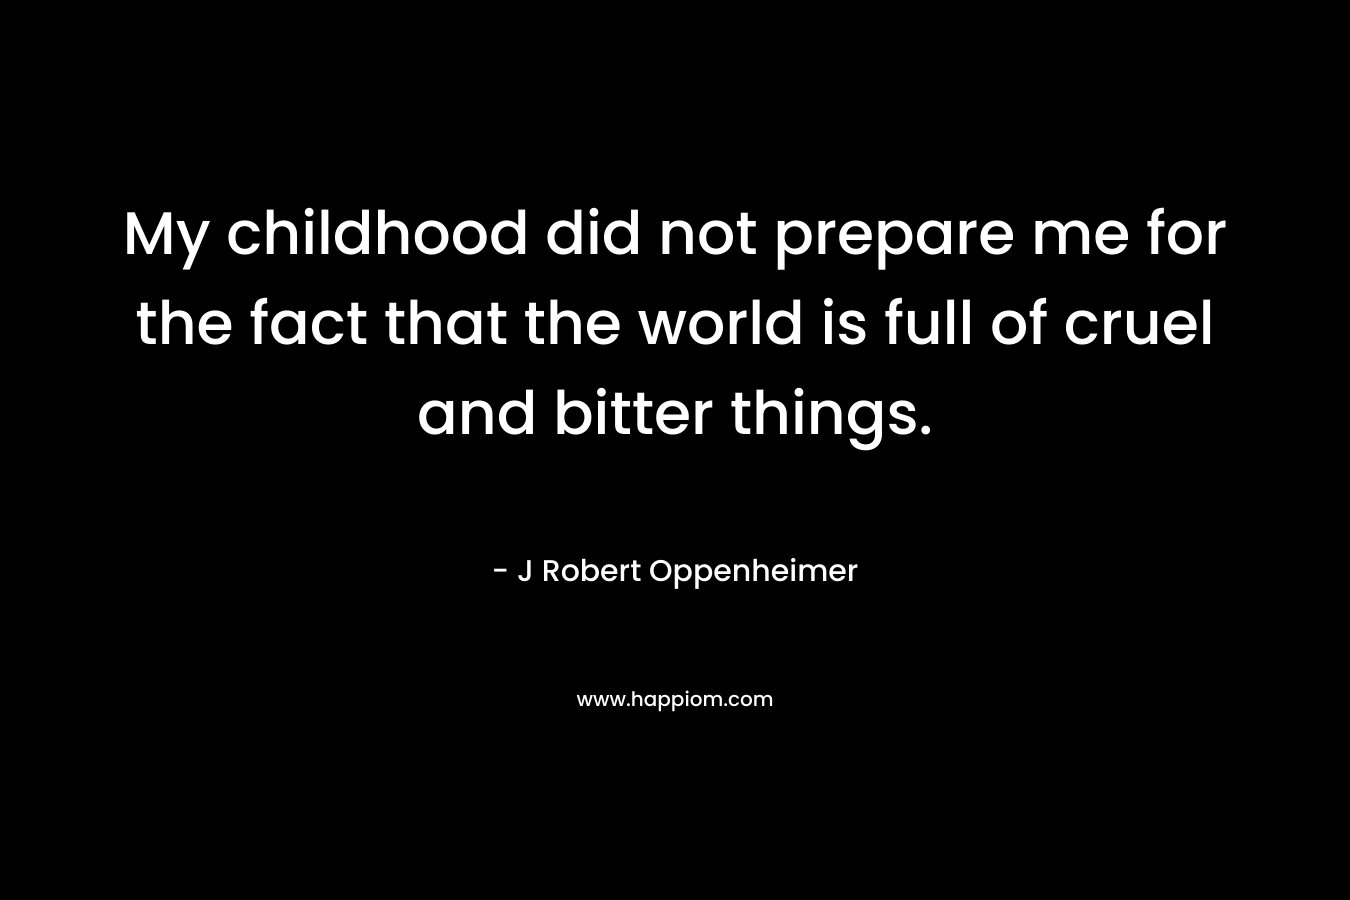 My childhood did not prepare me for the fact that the world is full of cruel and bitter things. – J Robert Oppenheimer